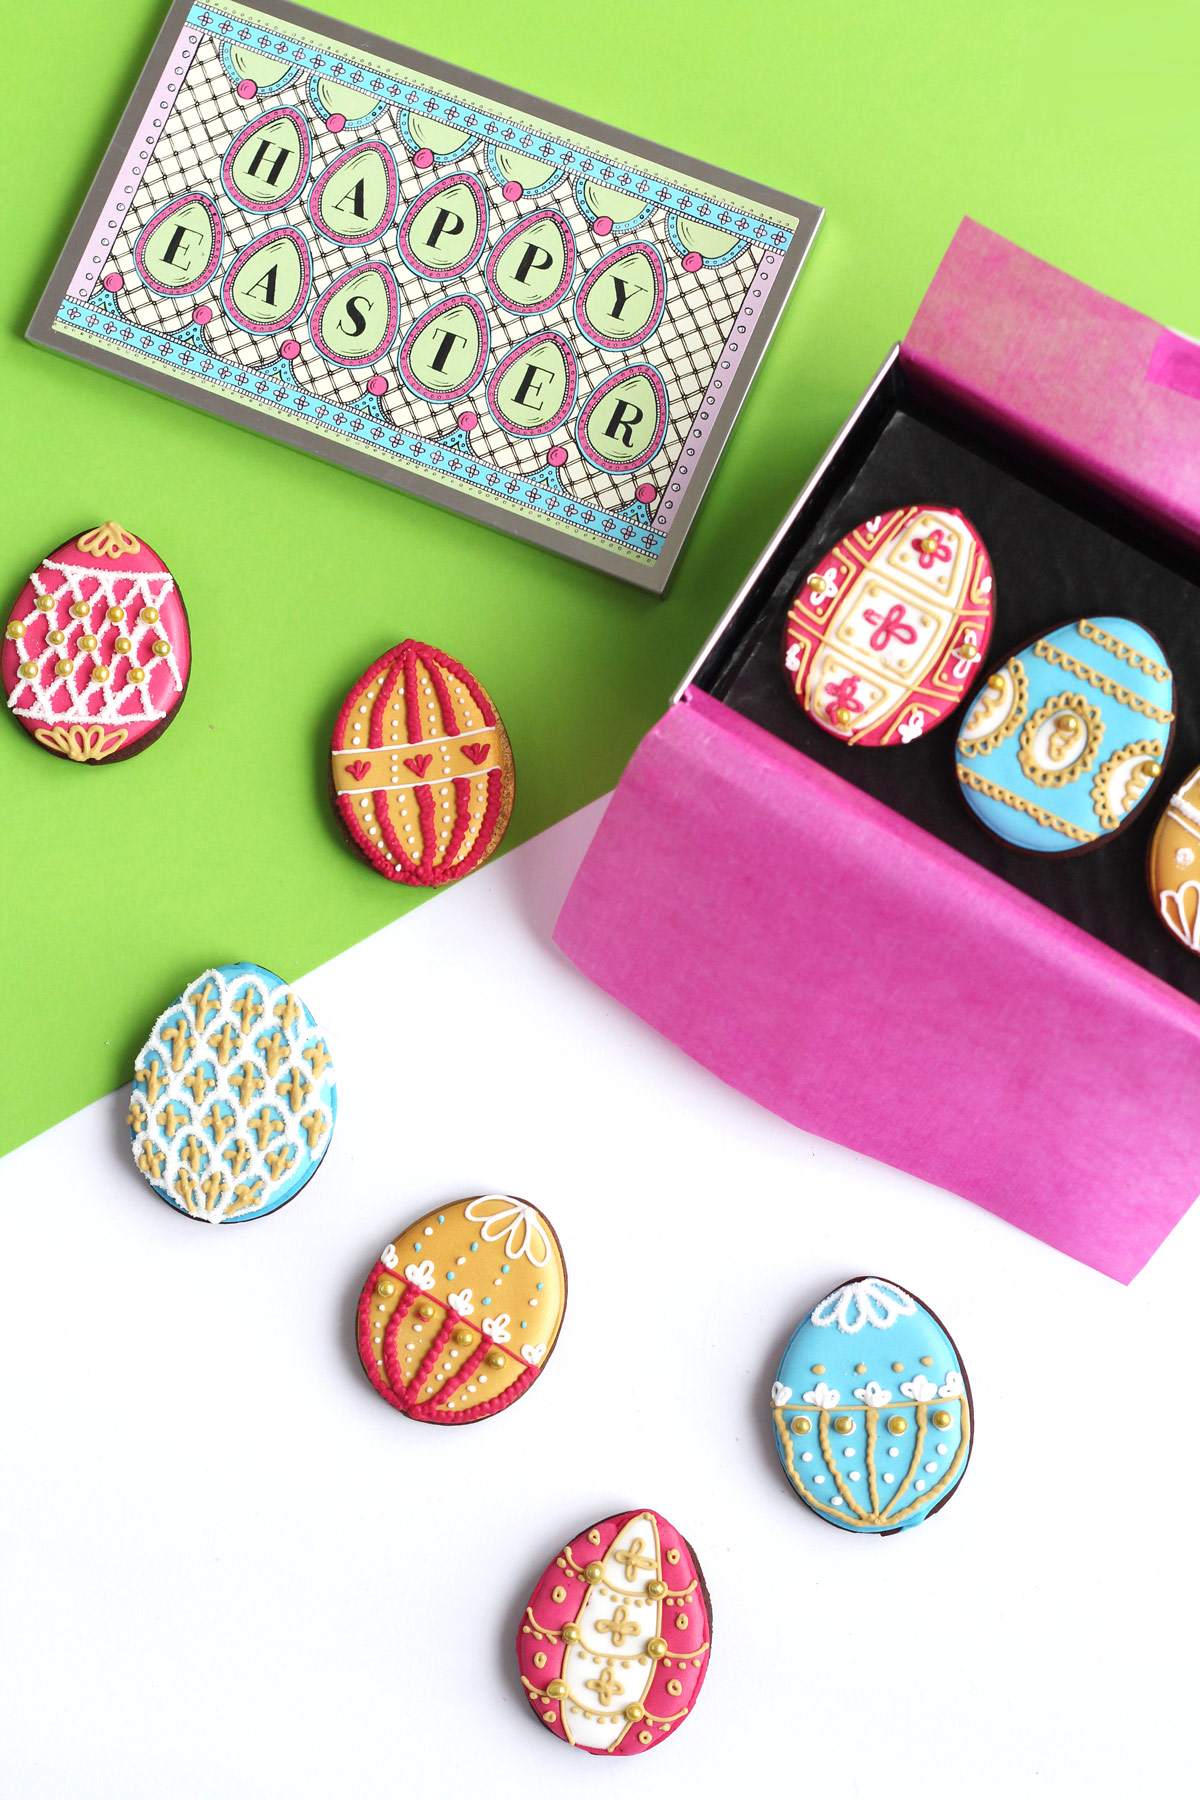 easter-chocolate-cupcakes-mini-eggs-recipe-nest-biscuiteers-decorated-egg-biscuits-review